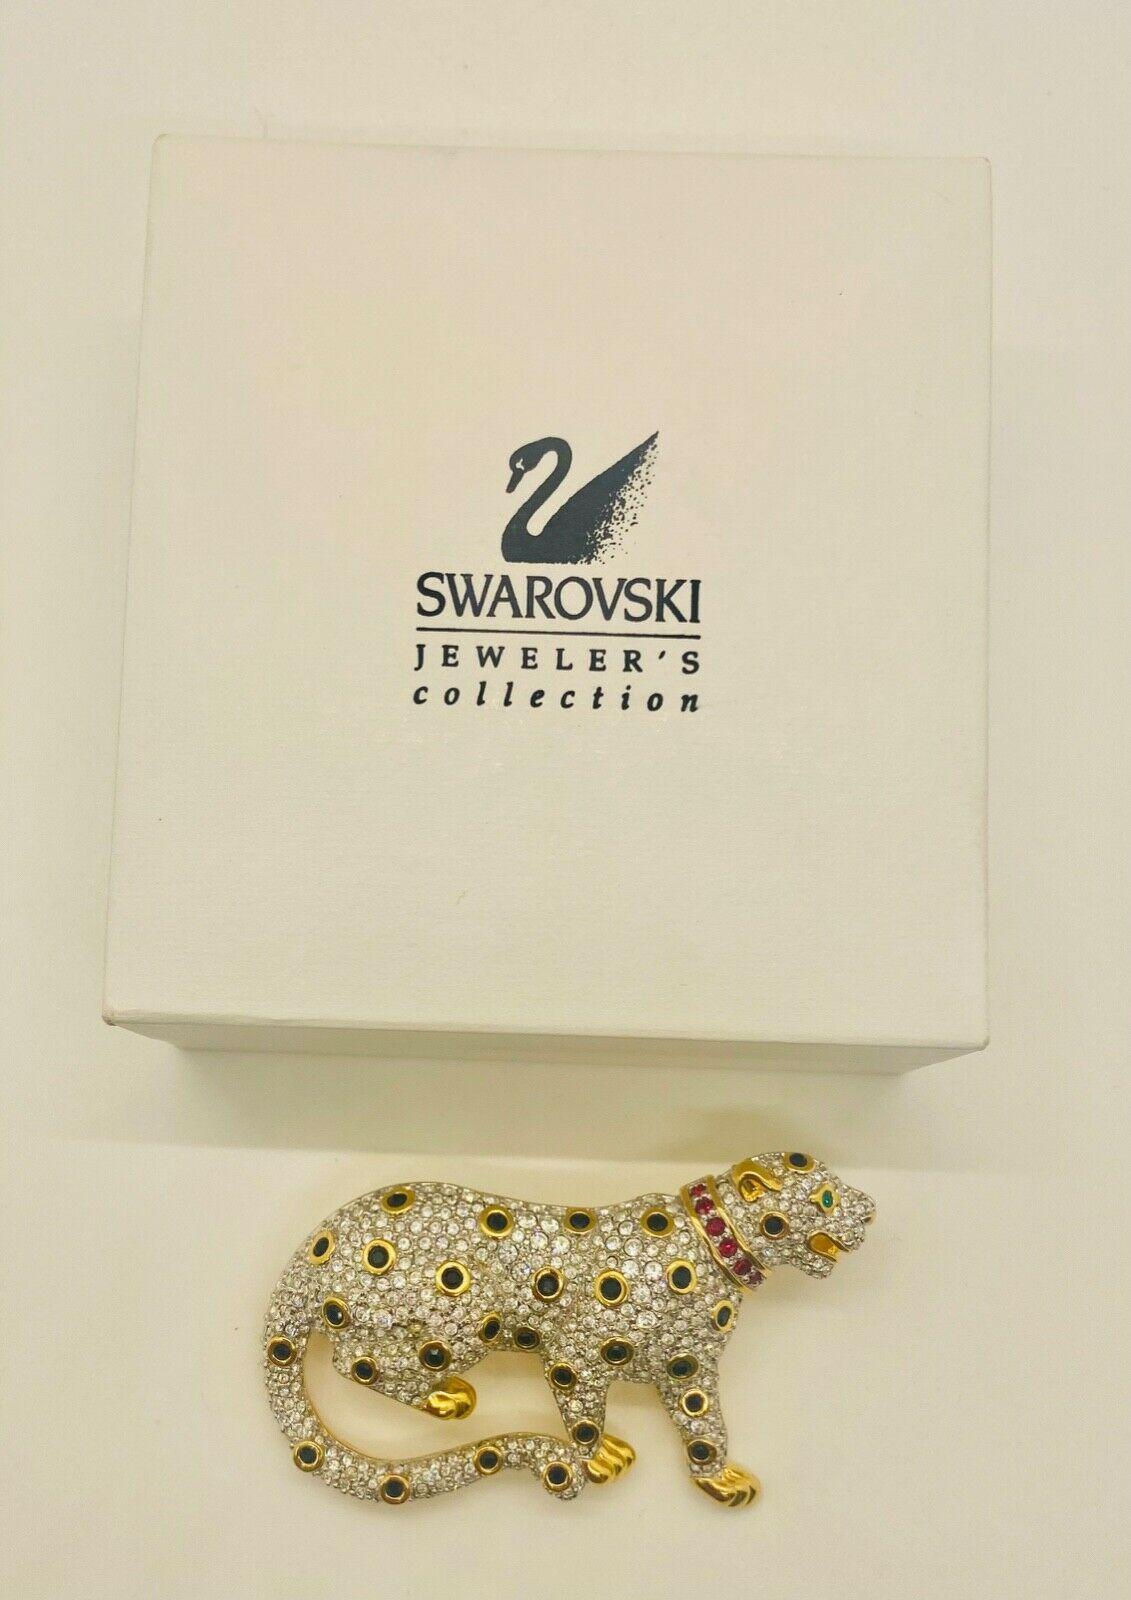 Swarovski Pave' Crystal Gold Leopard Brooch or Pin, Signed and Retired For Sale 1